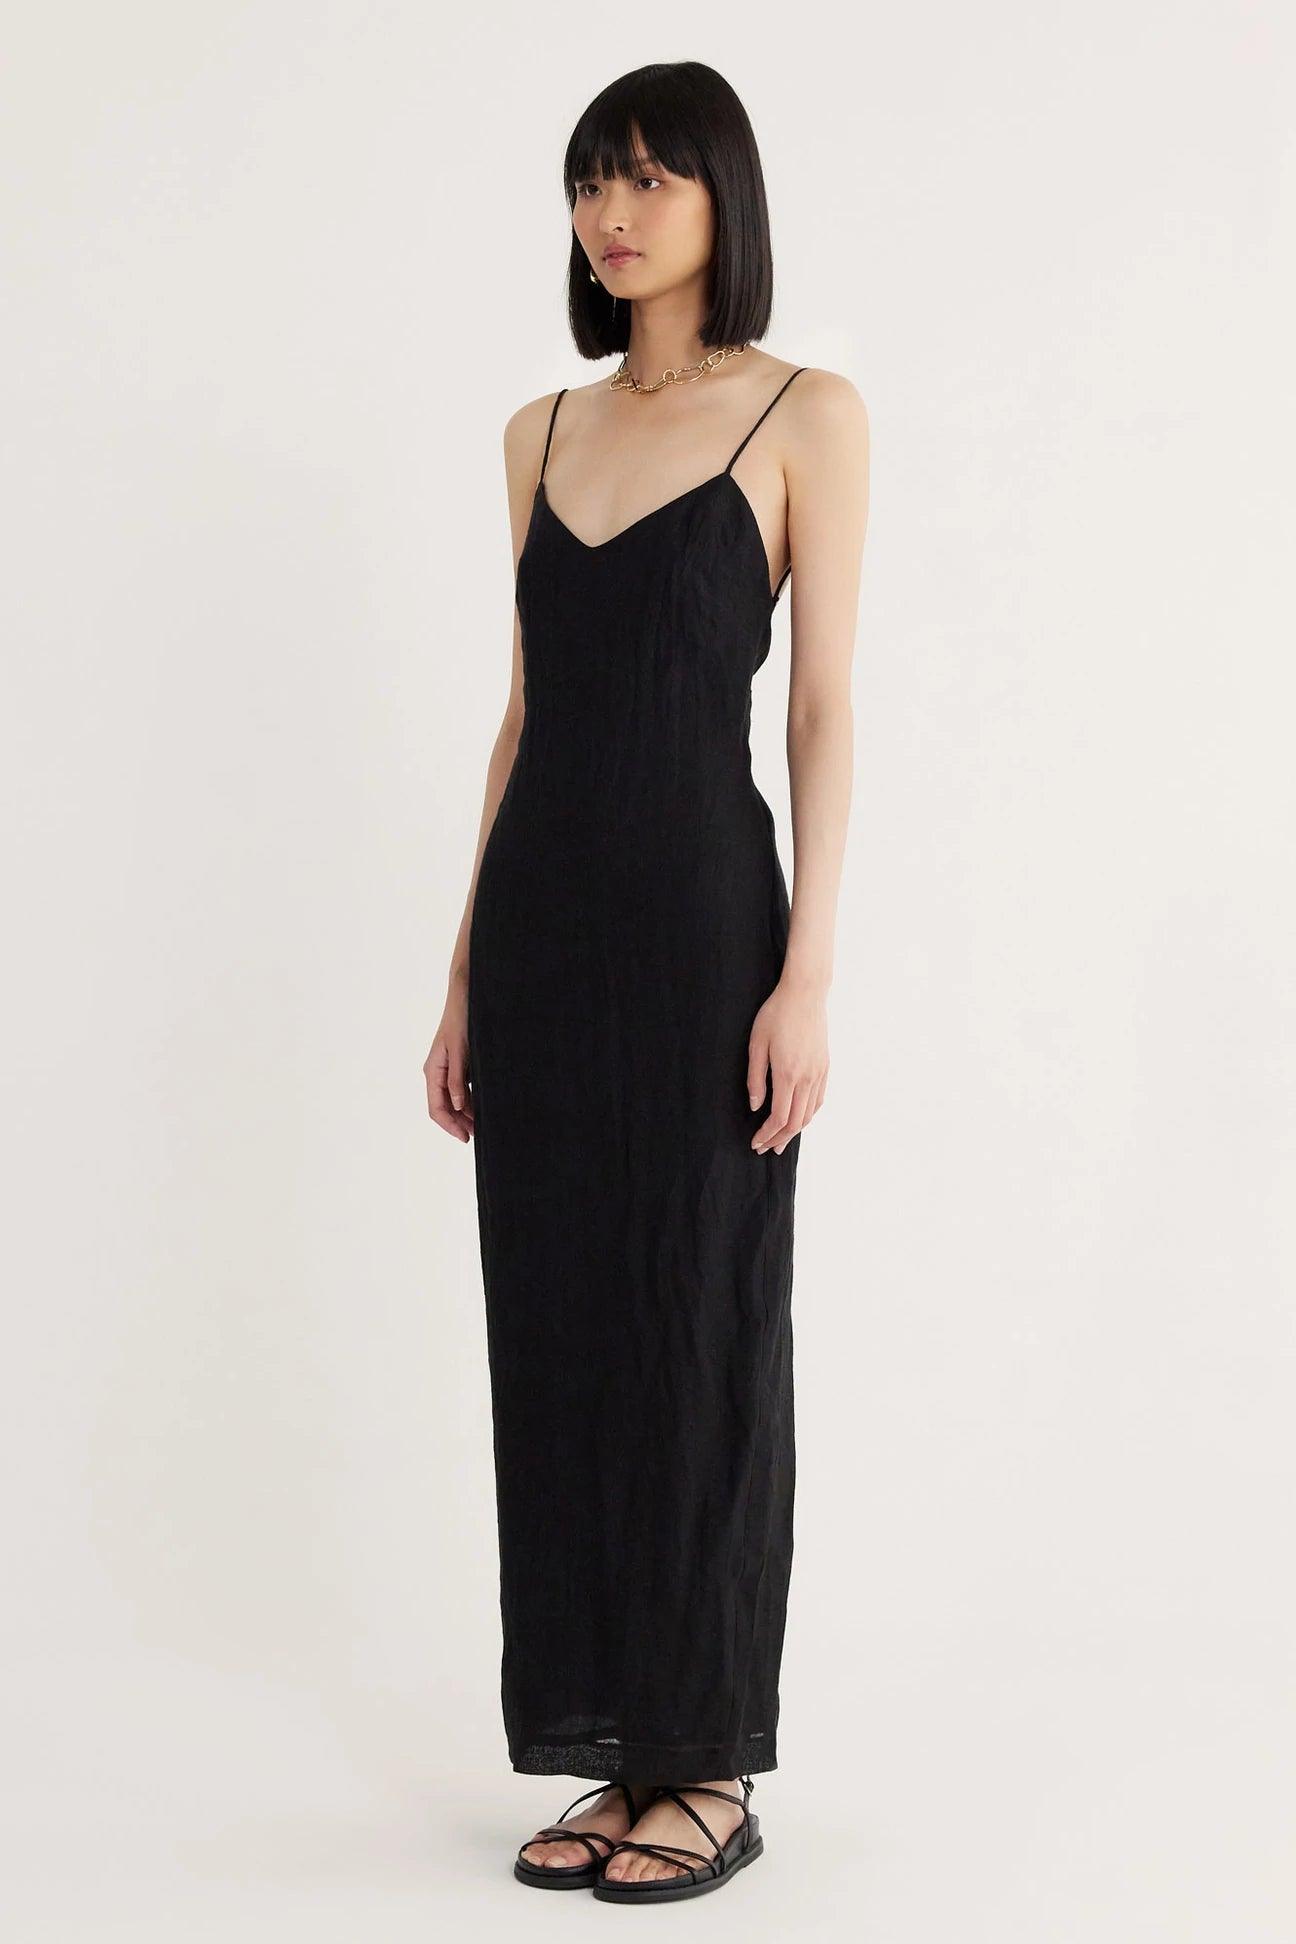 Mia Lace Back Maxi Dress by Rumer - Haven